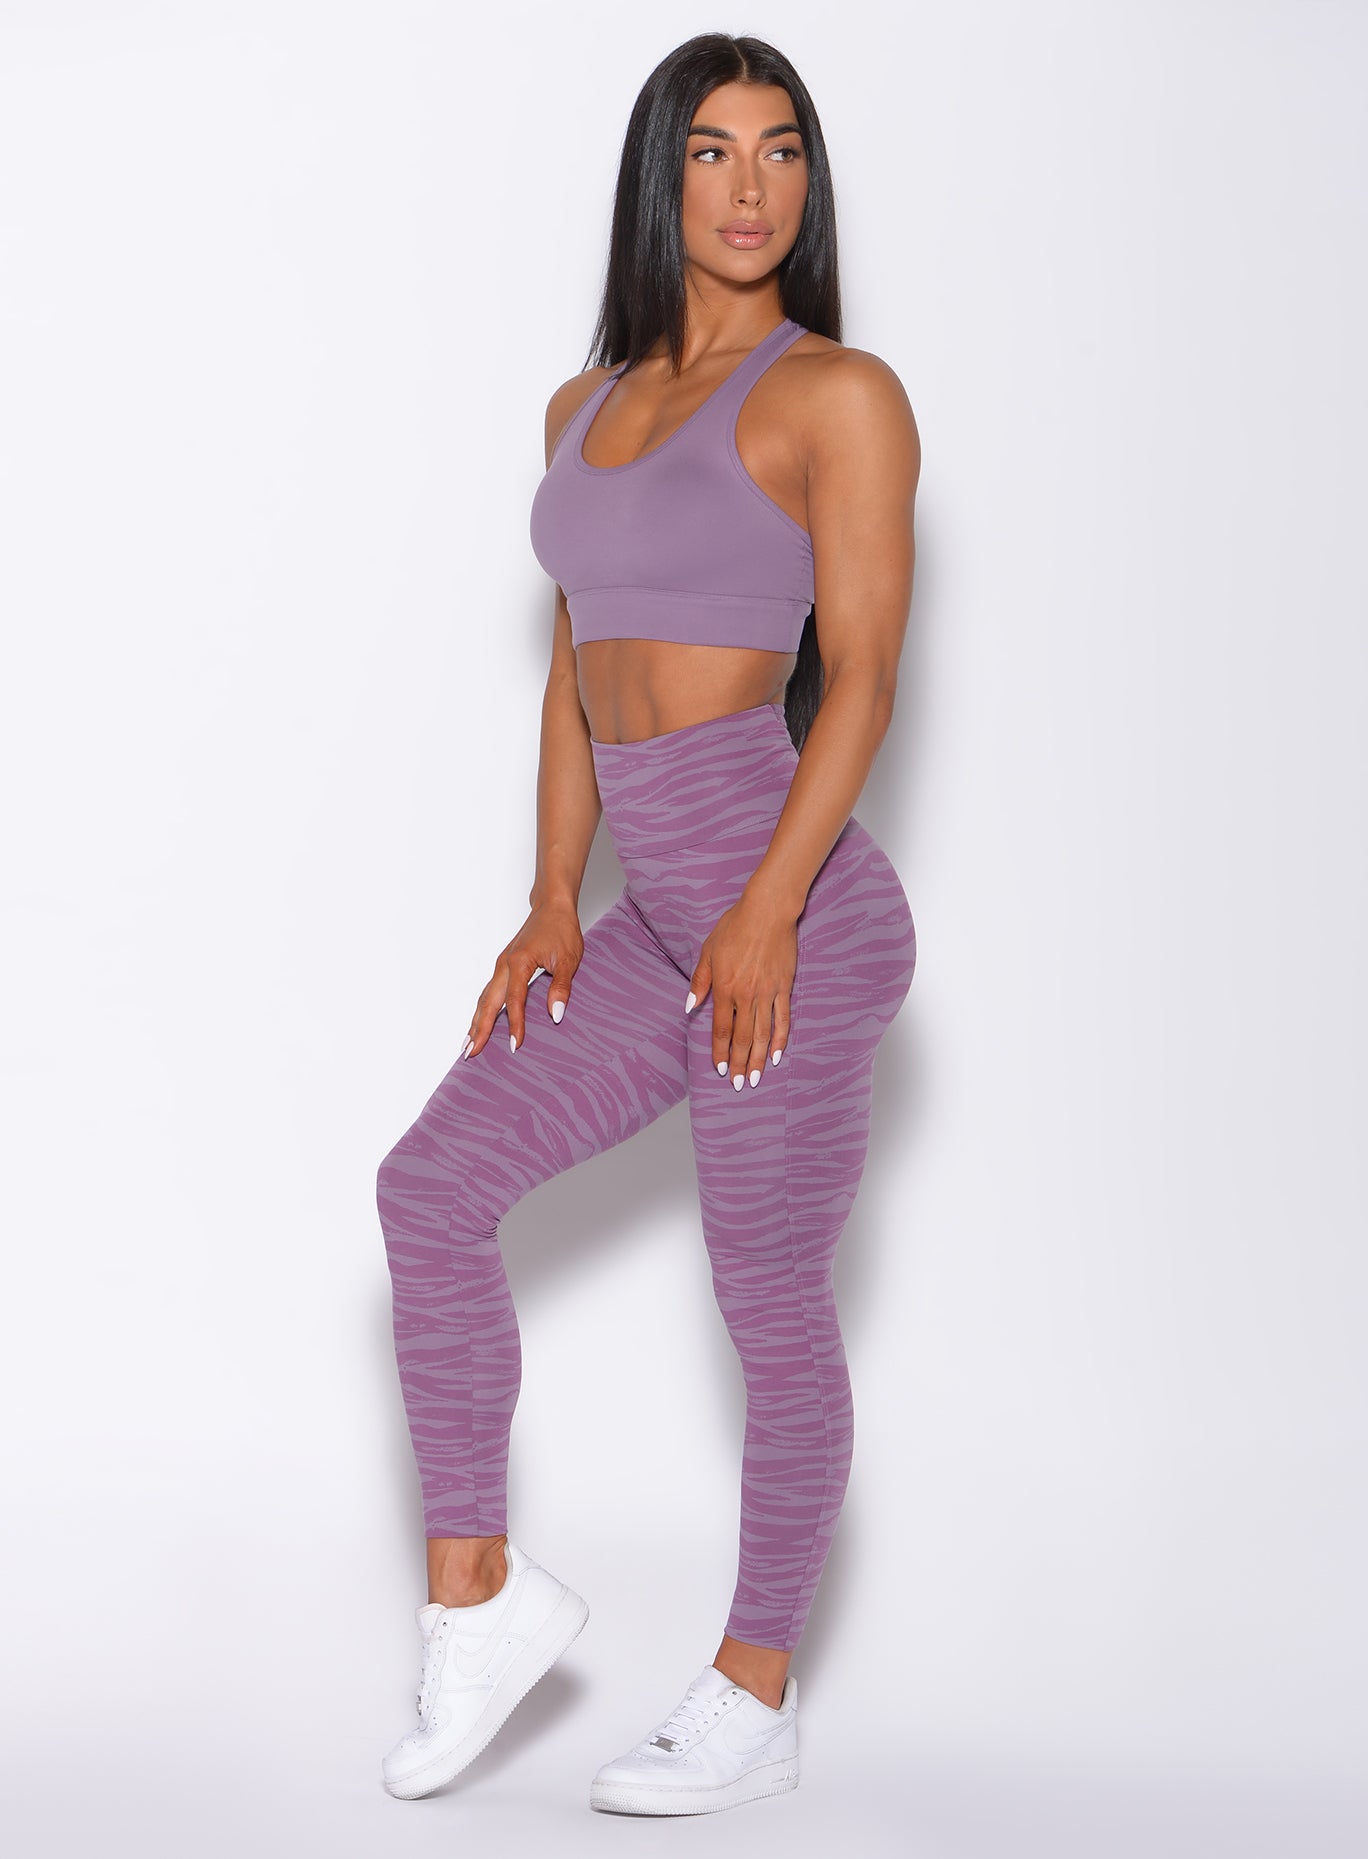 Picture of a model captured in a left-side profile, angled slightly to her left while flaunting our alluring orchid purple sexy back leggings and matching bra.